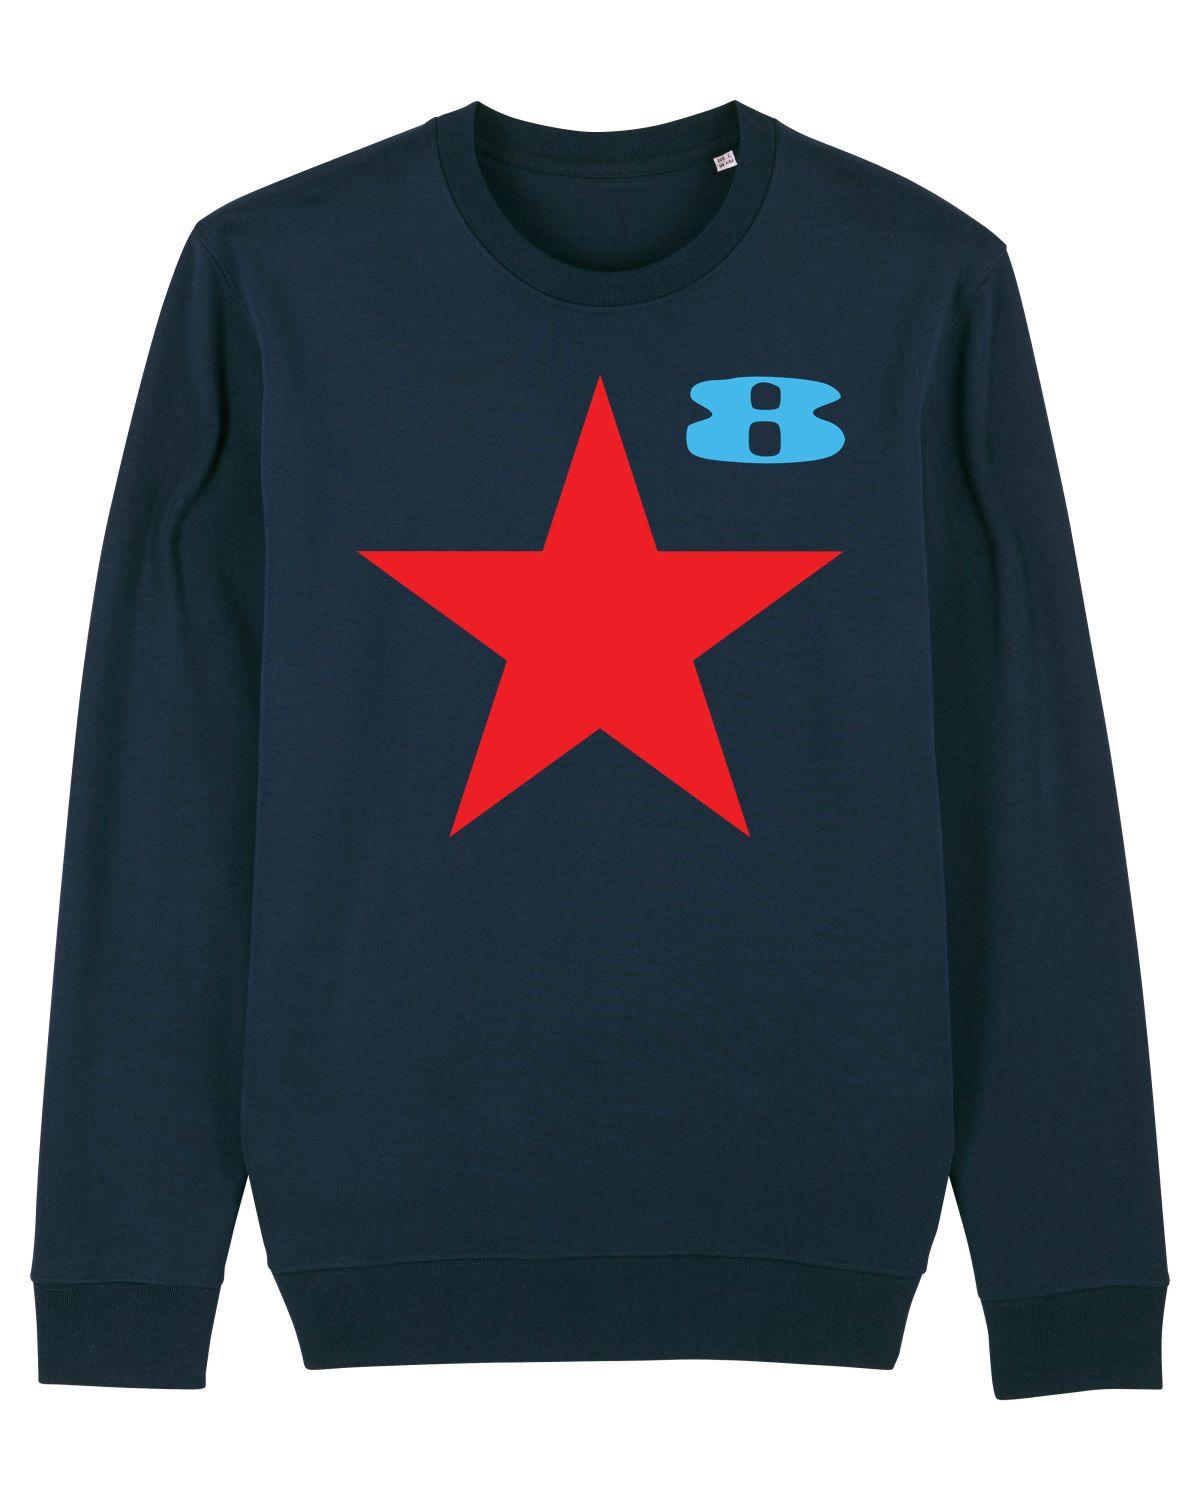 STAR: Navy Sweatshirt Inspired by Peter Blake and Paul Weller - SOUND IS COLOUR